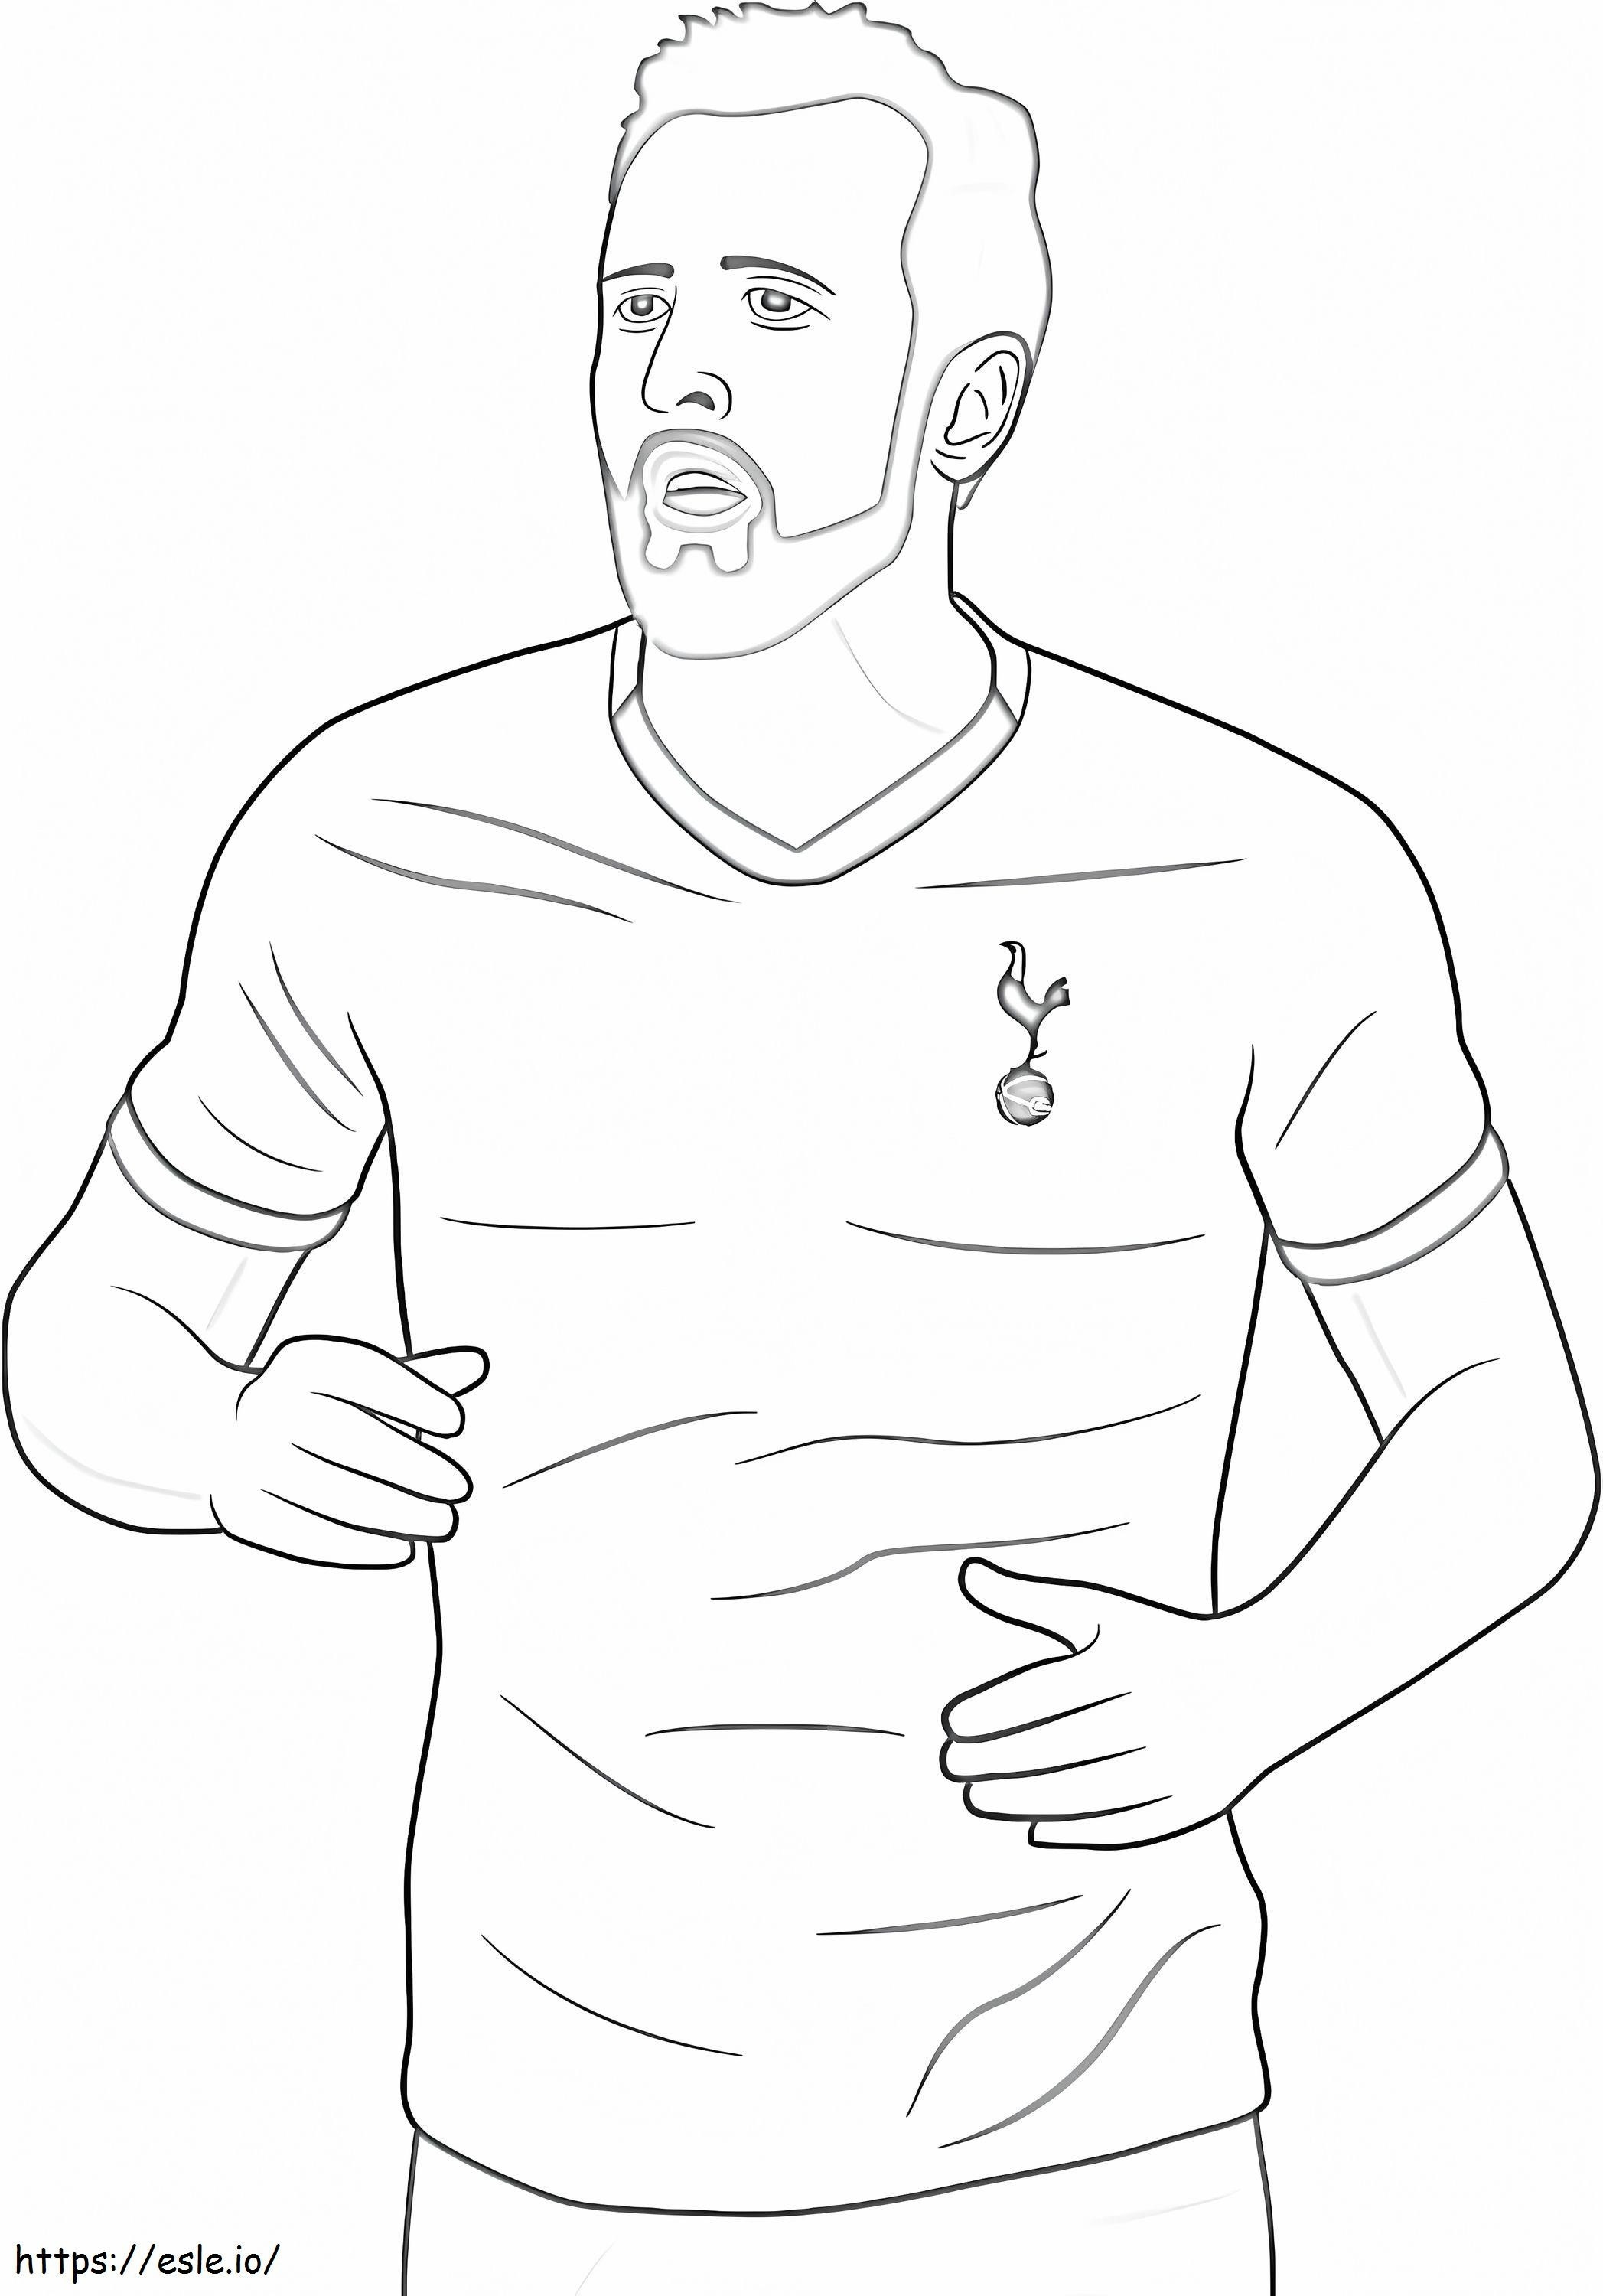 Harry Kane 7 coloring page